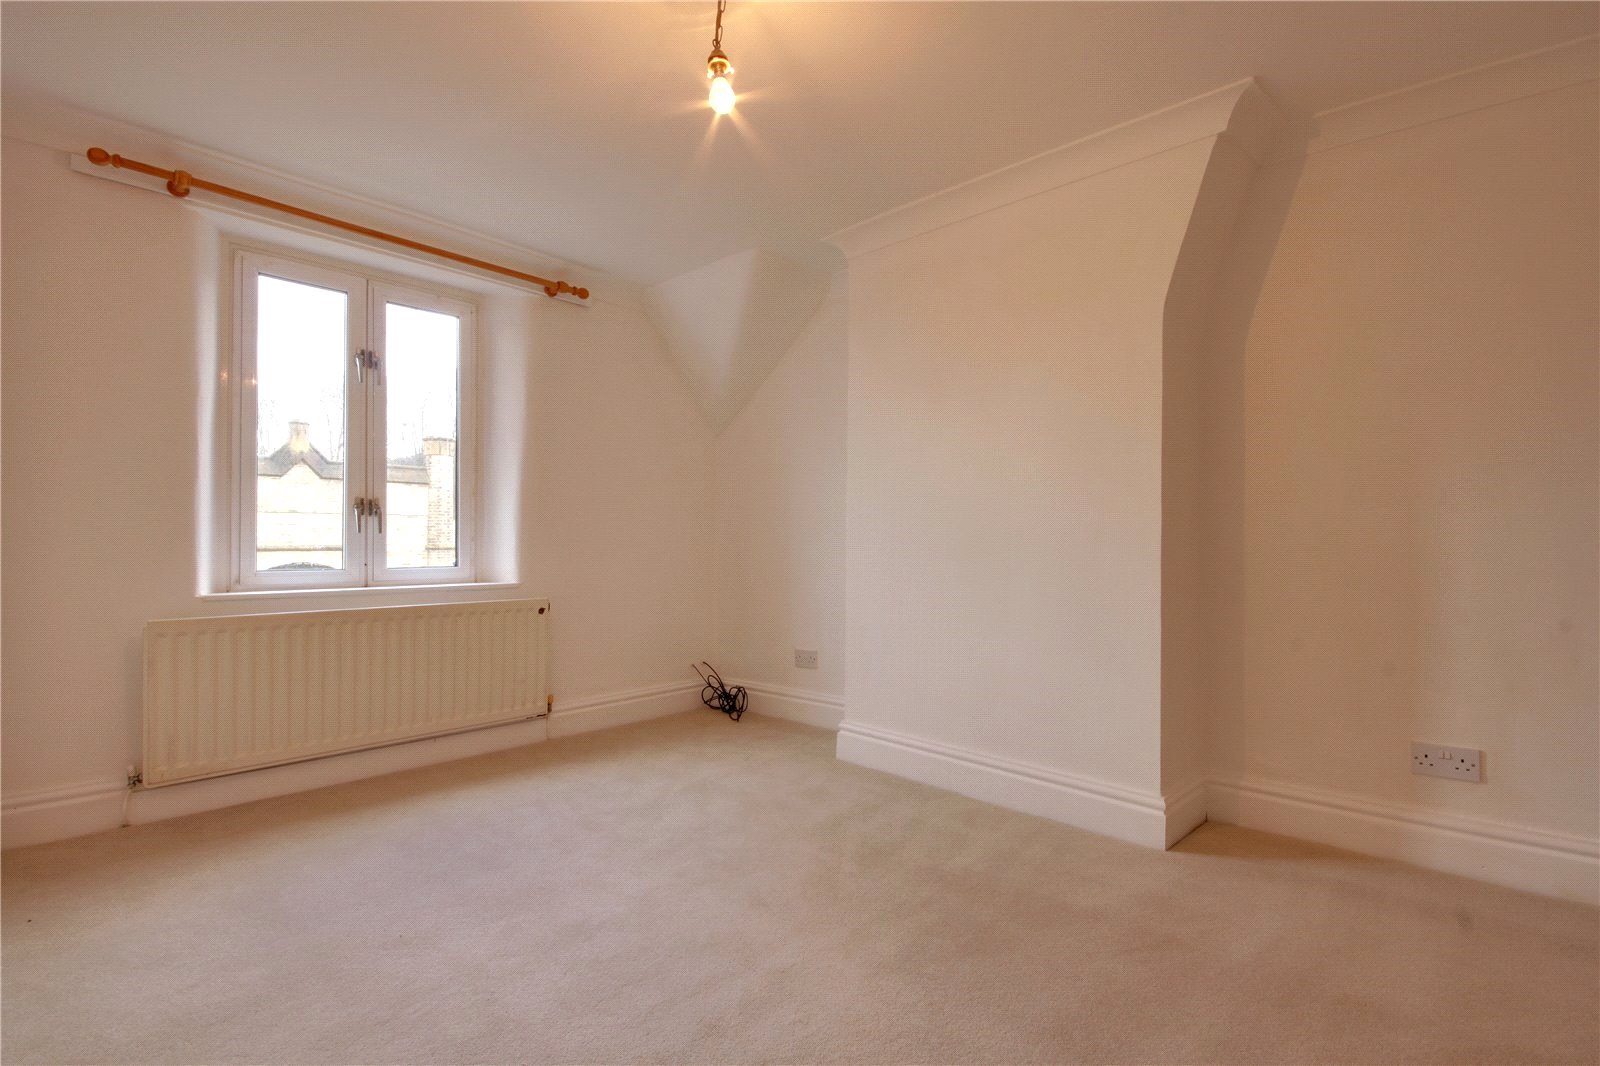 2 bed house for sale in Wilton Village, Wilton  - Property Image 10